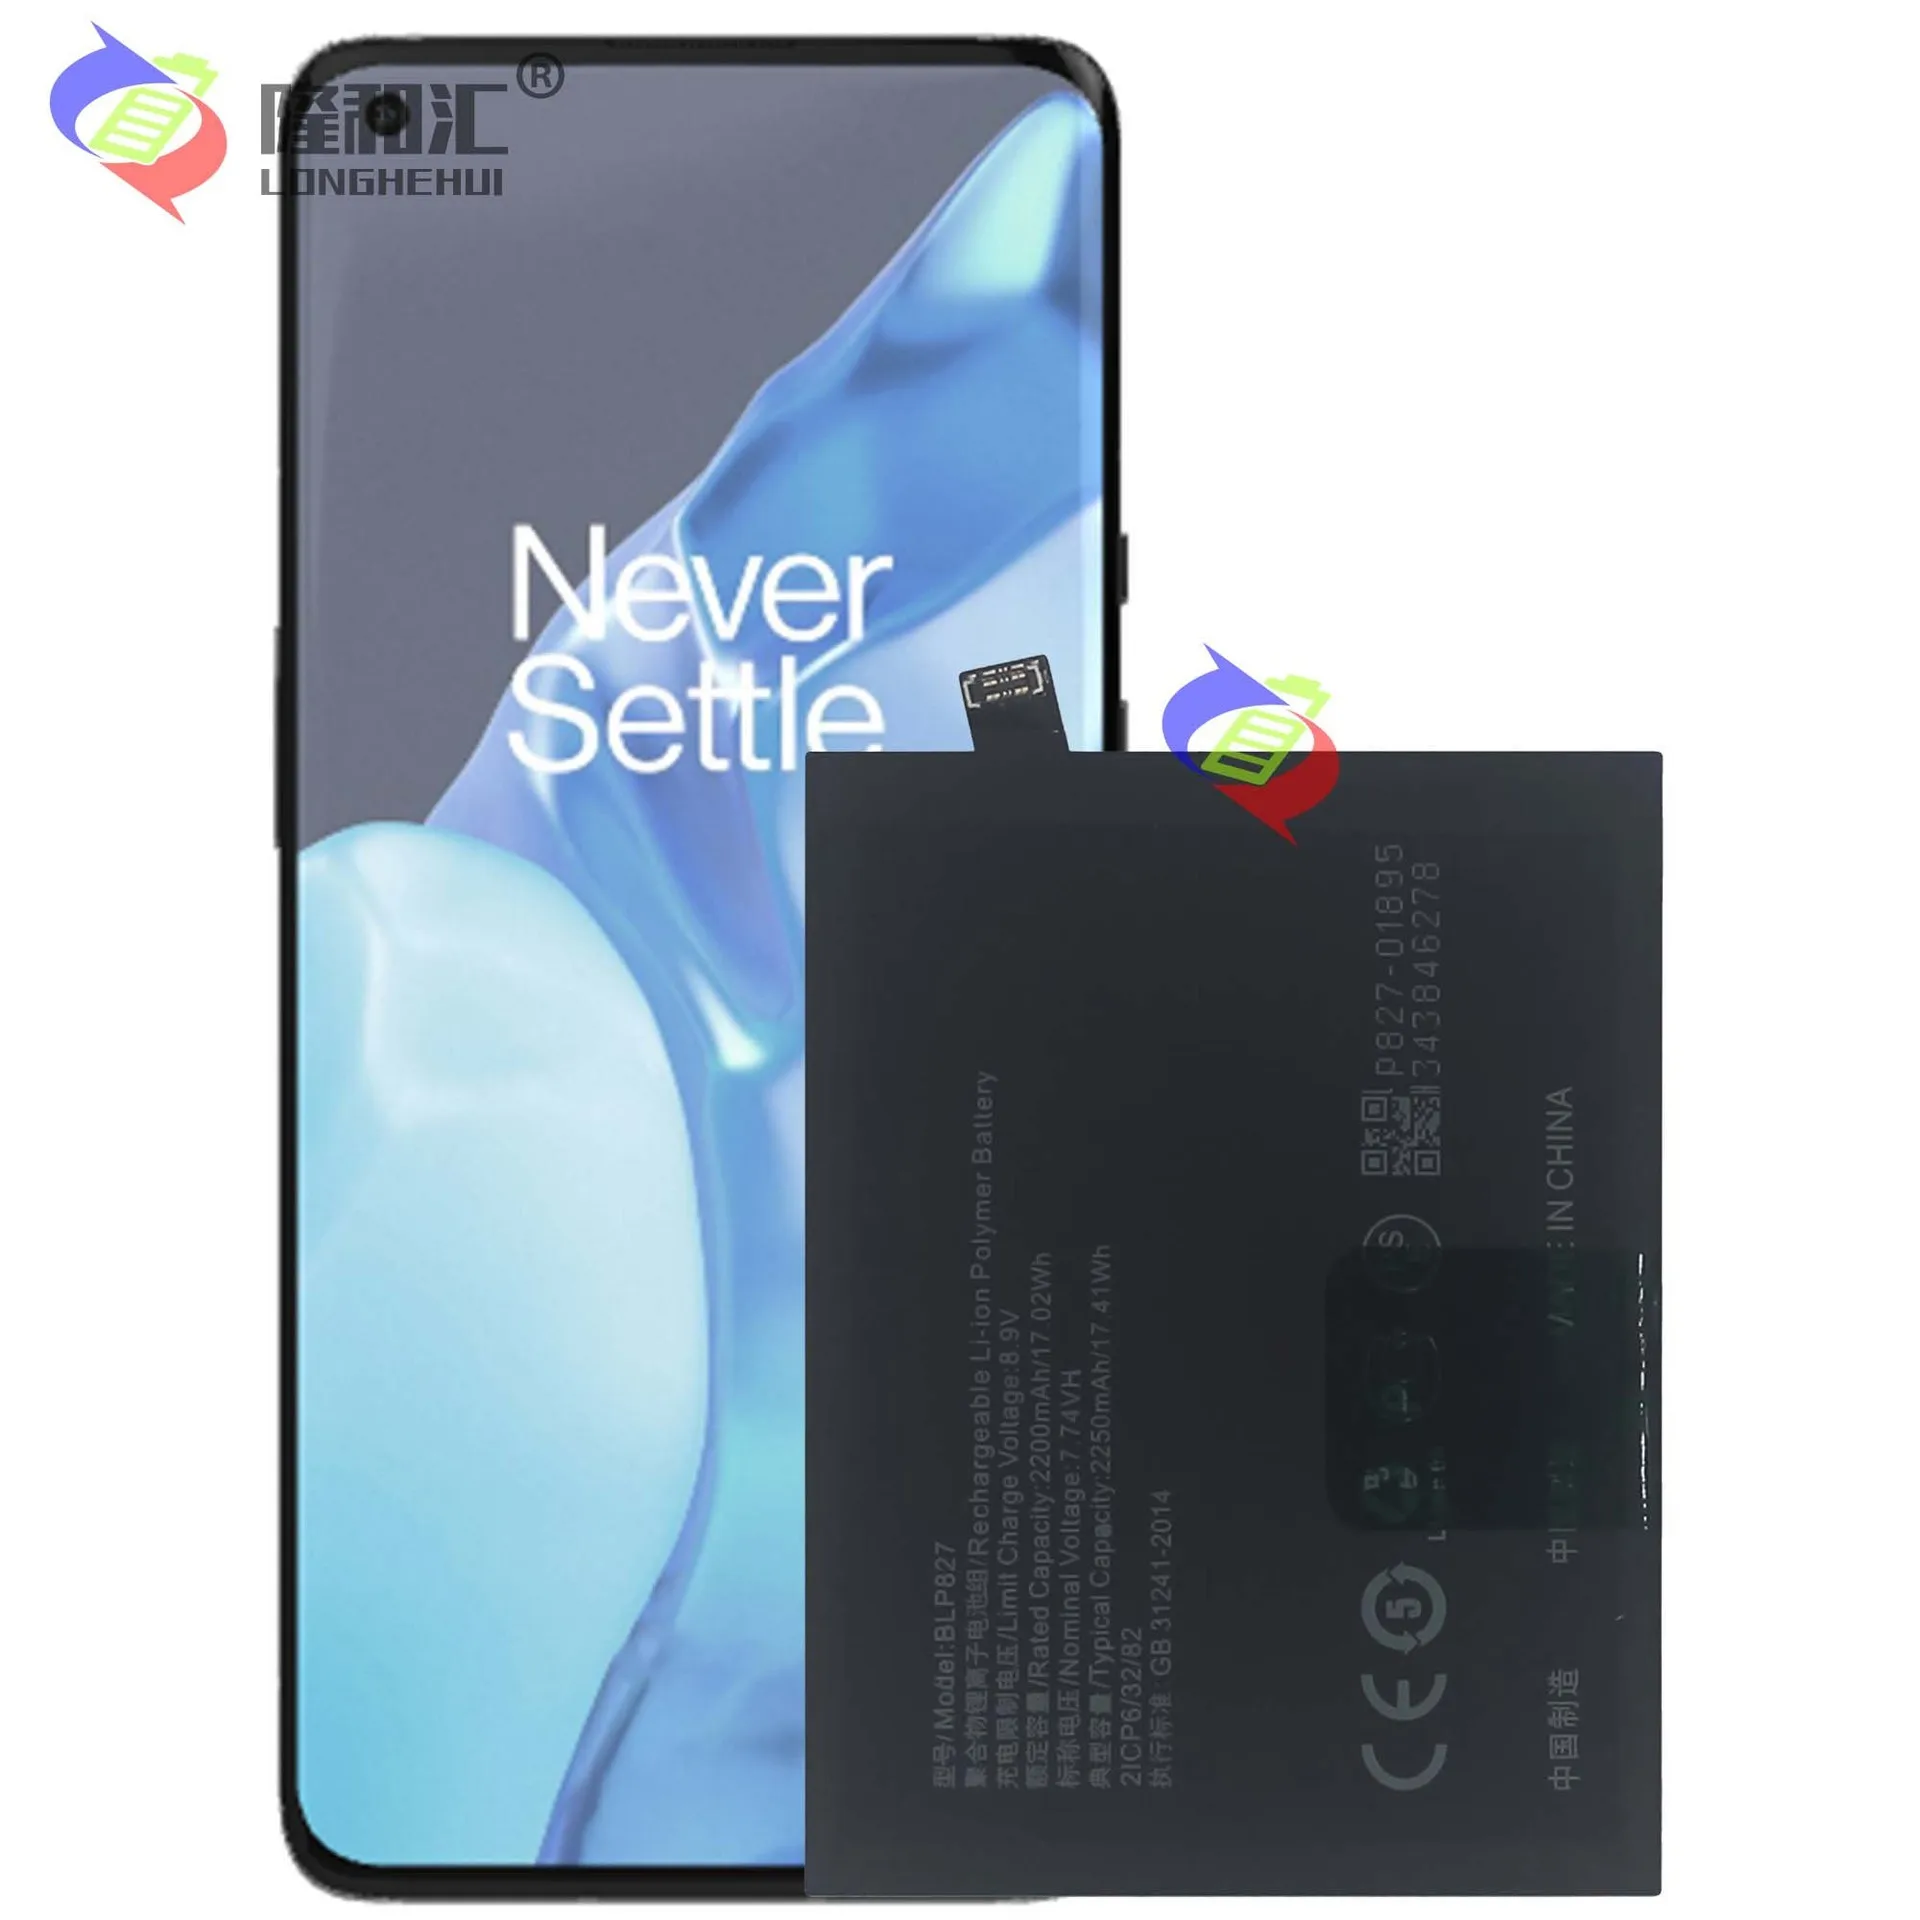 Original Replacement Battery BLP761 For OnePlus 8 Pro 8T One Plus 9 PRO Nord N10 N100 1+ 8Pro 9Rro BLP827 Authentic Battery enlarge